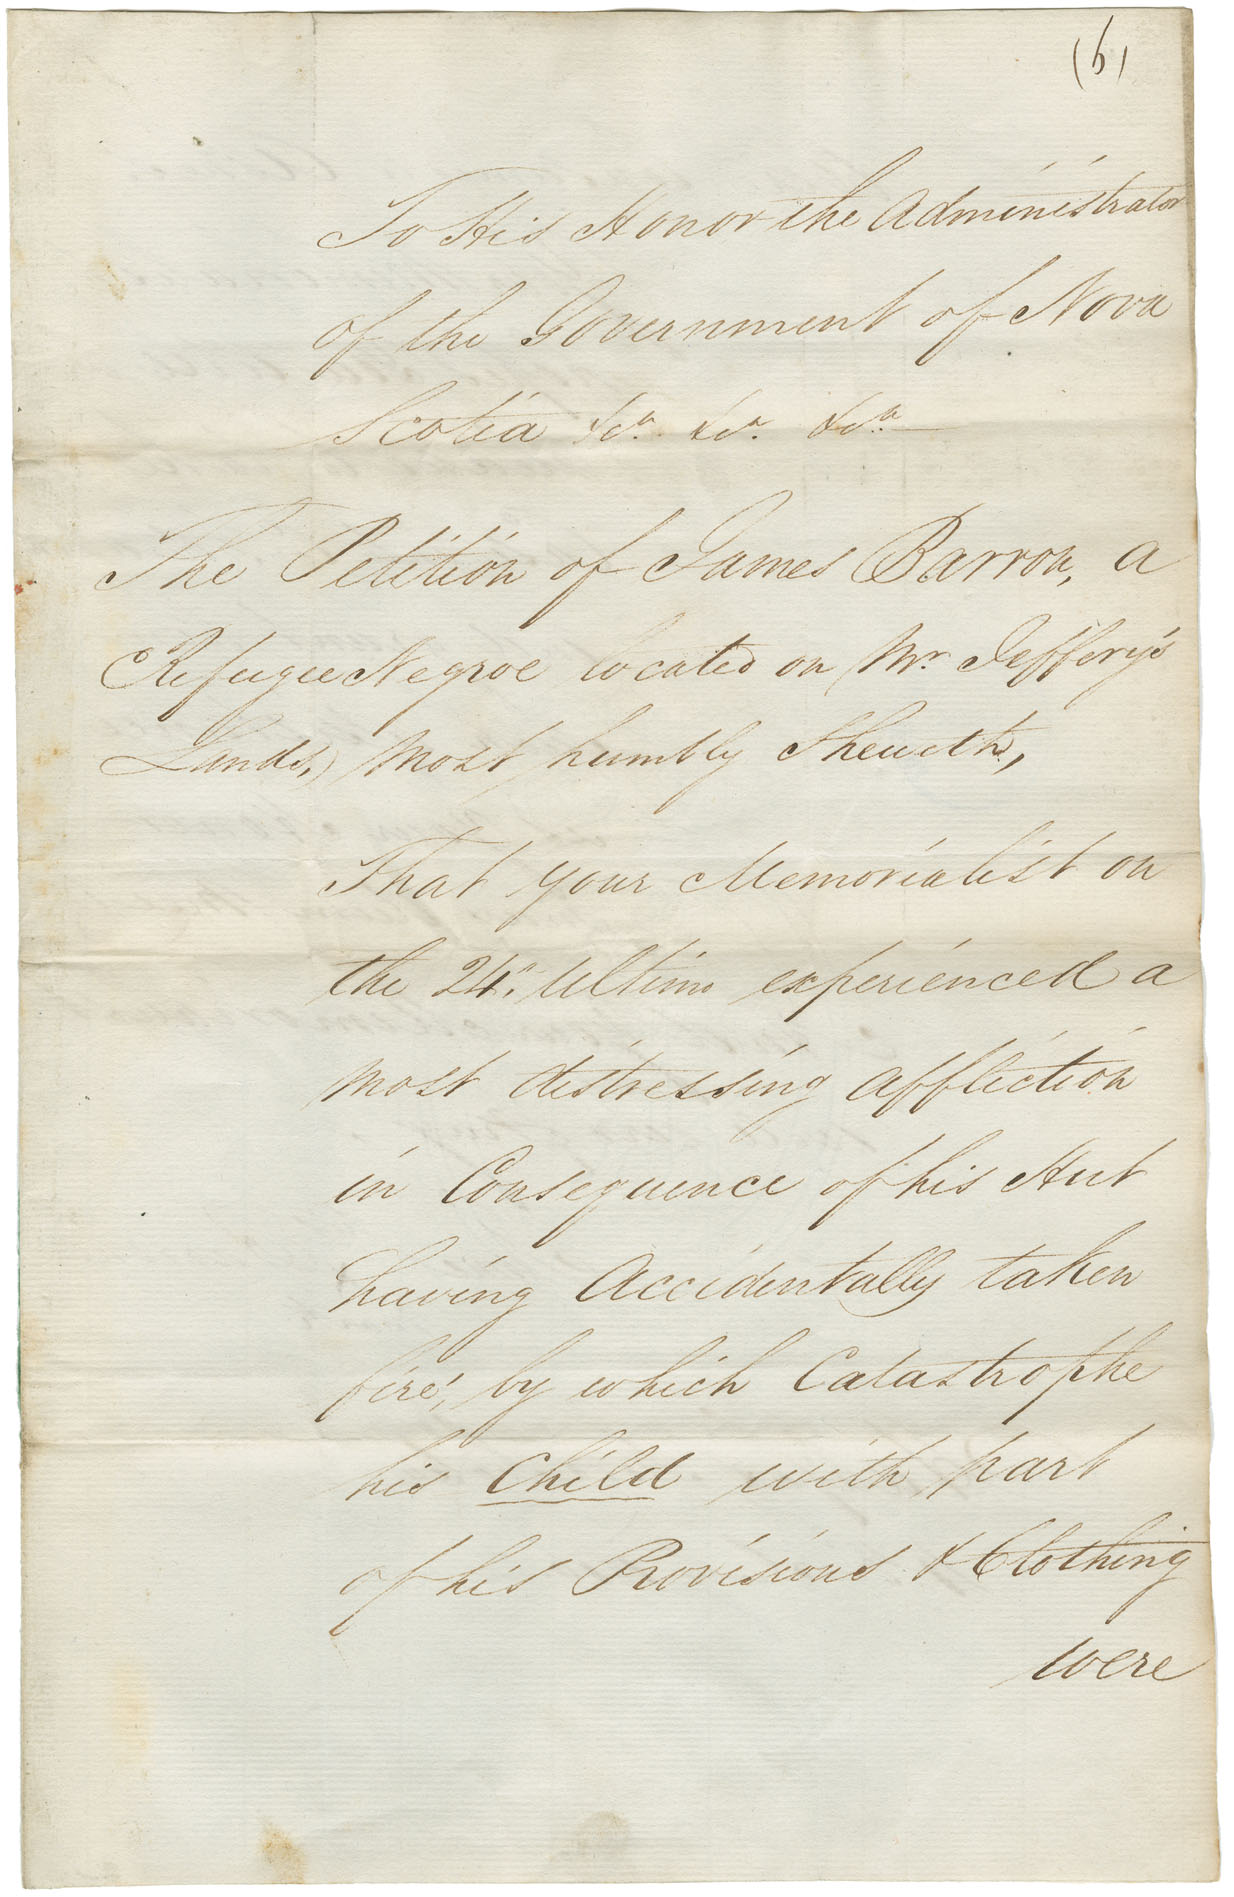 Petition from James Barrow [Barron?], a Black Refugee, to the Administrator of the Government, regarding his house which had been destroyed by fire